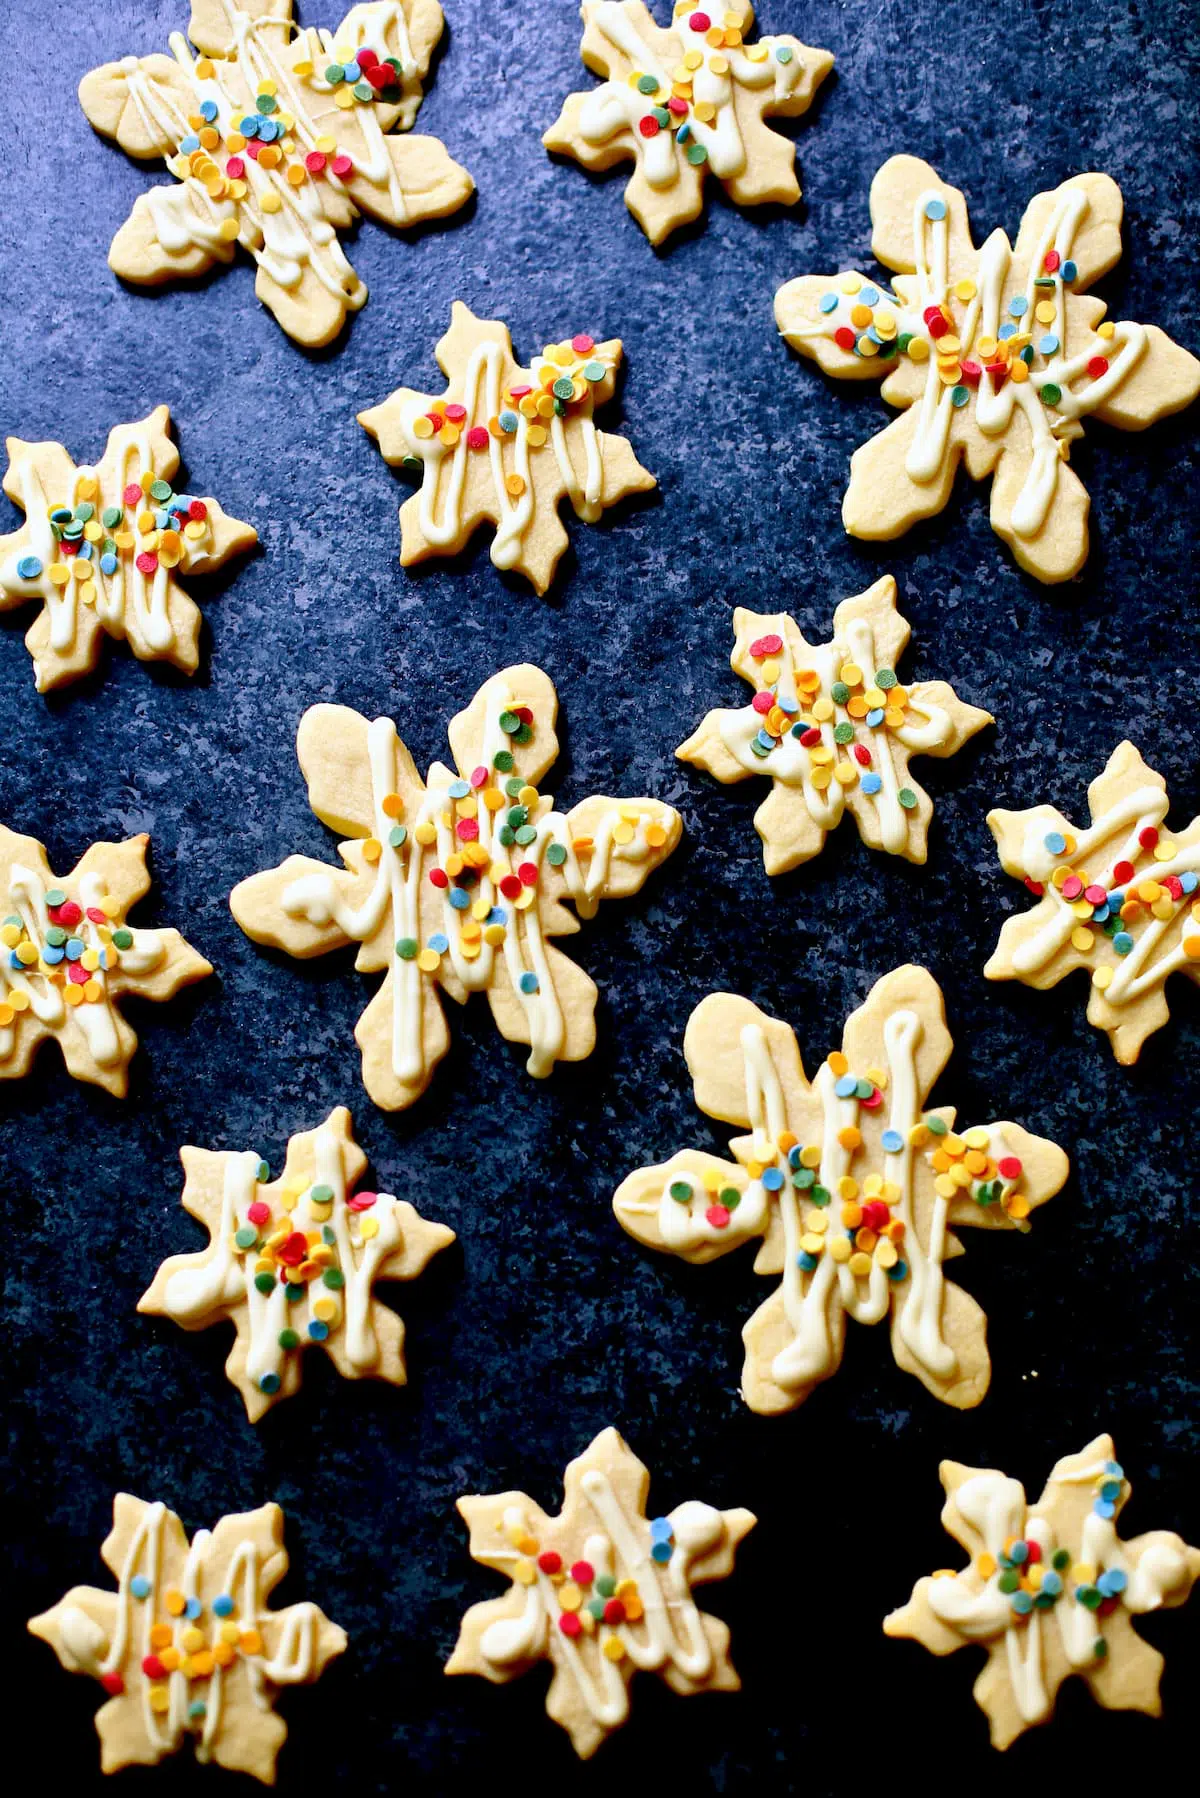 cookies shaped like snowflakes with chocolate drizzle and sprinkles.